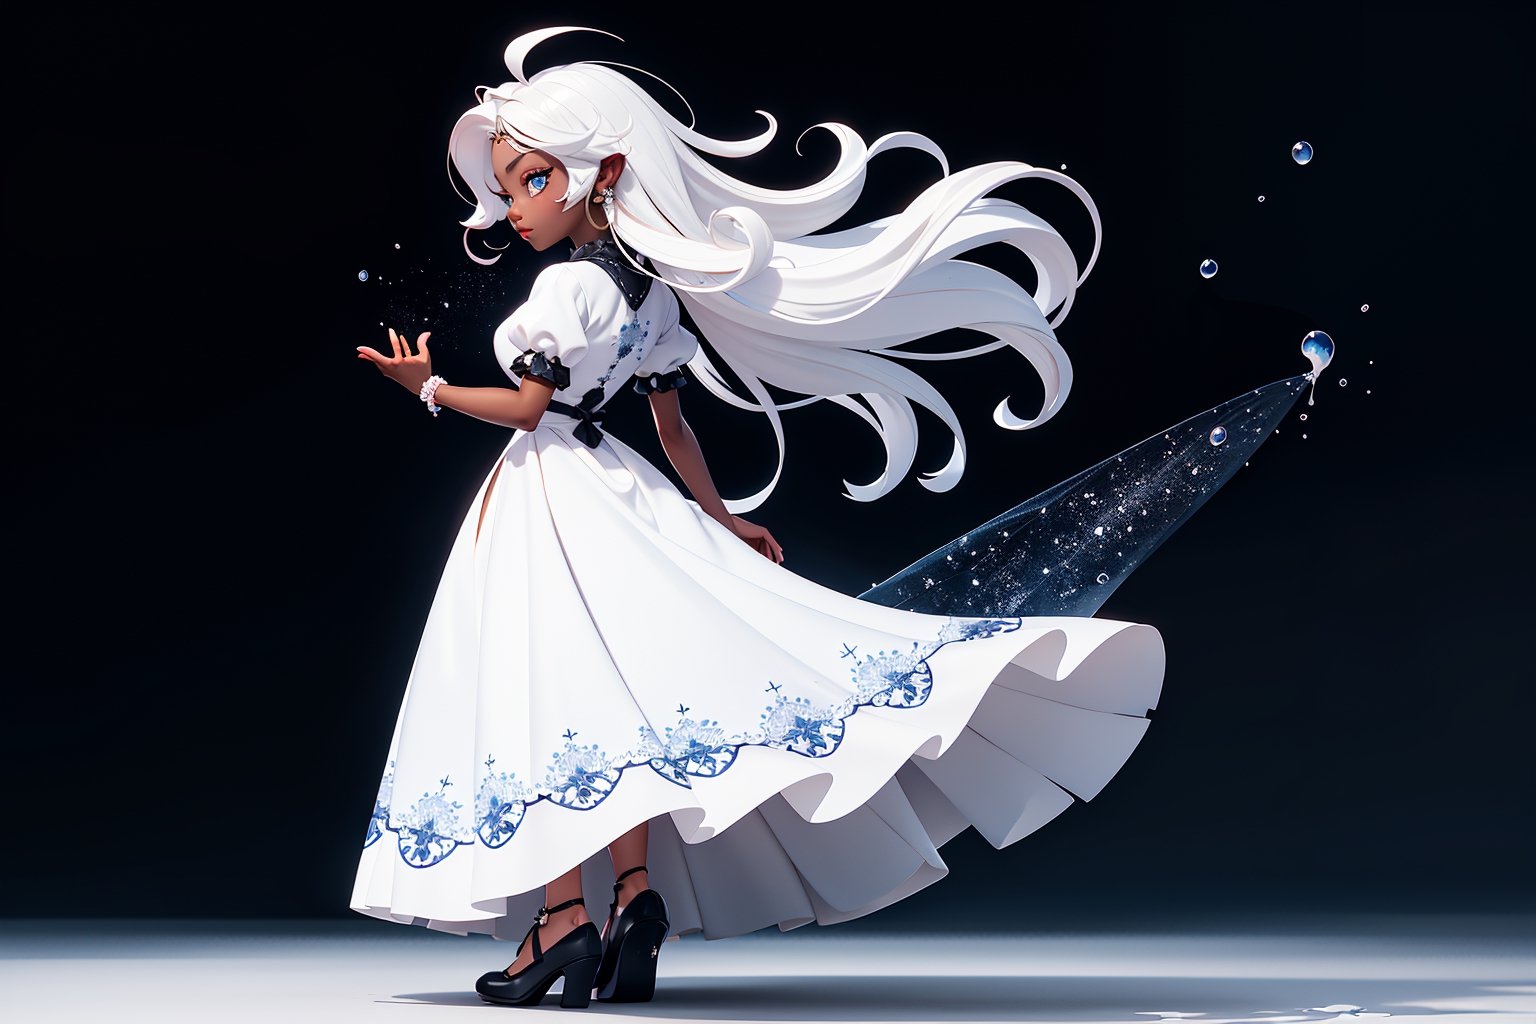 a woman elfa style WoW with white hair and blue eyes is in a white dress with a black background and a splash of paint,Celestial Skin ,dark skin, from behind,flower-pattern_see-through_white_dress, facing_viewer, hair blowing in the wind, white shoes